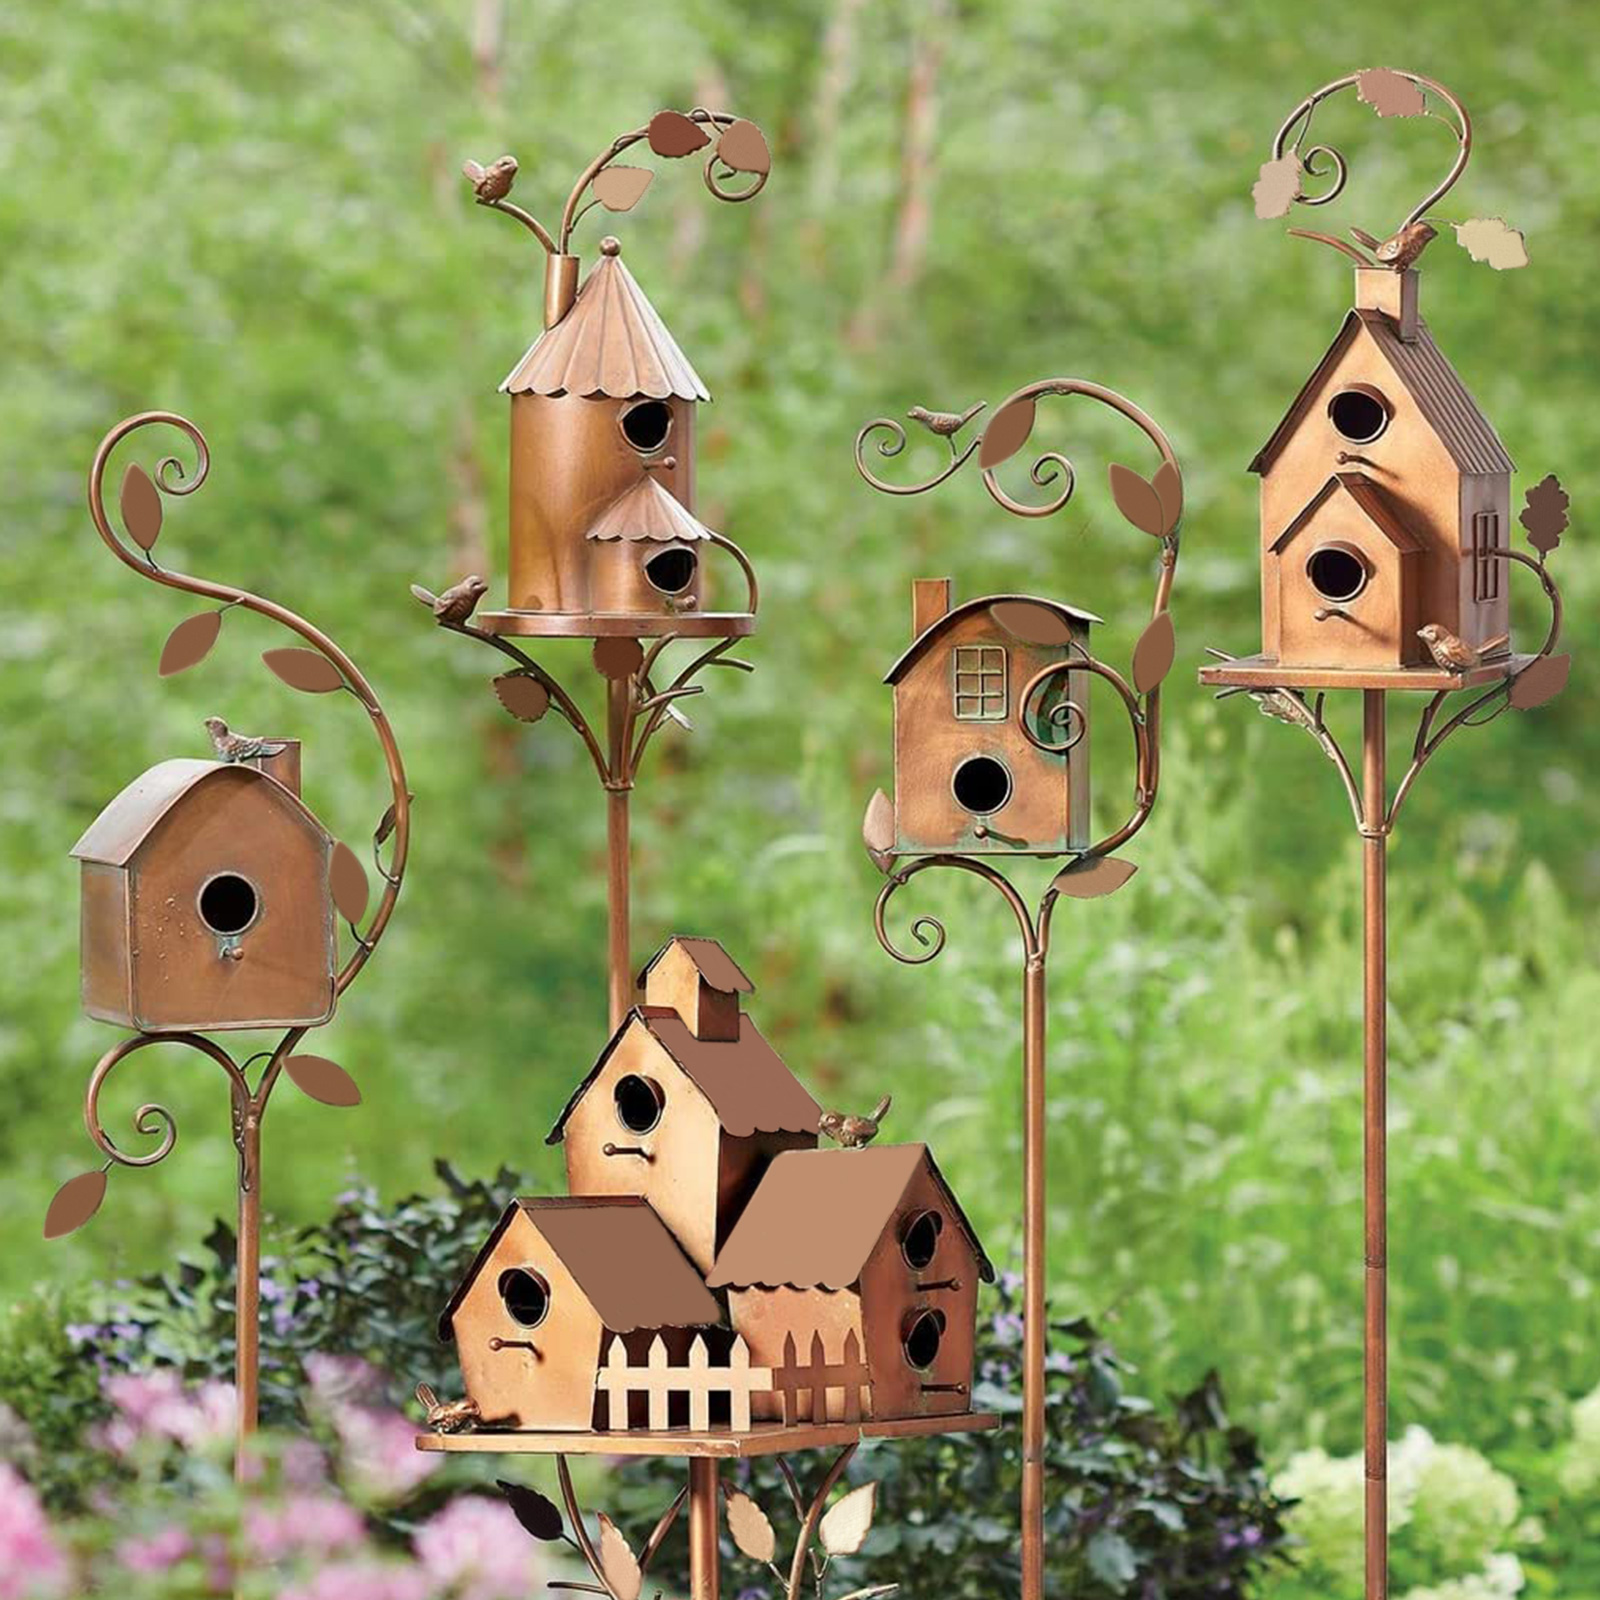 Asdomo Metal Birdhouse Garden Stakes Bird's Nest Multi-size Yellow Easy To Assemble Resting Place For Birds - image 3 of 8